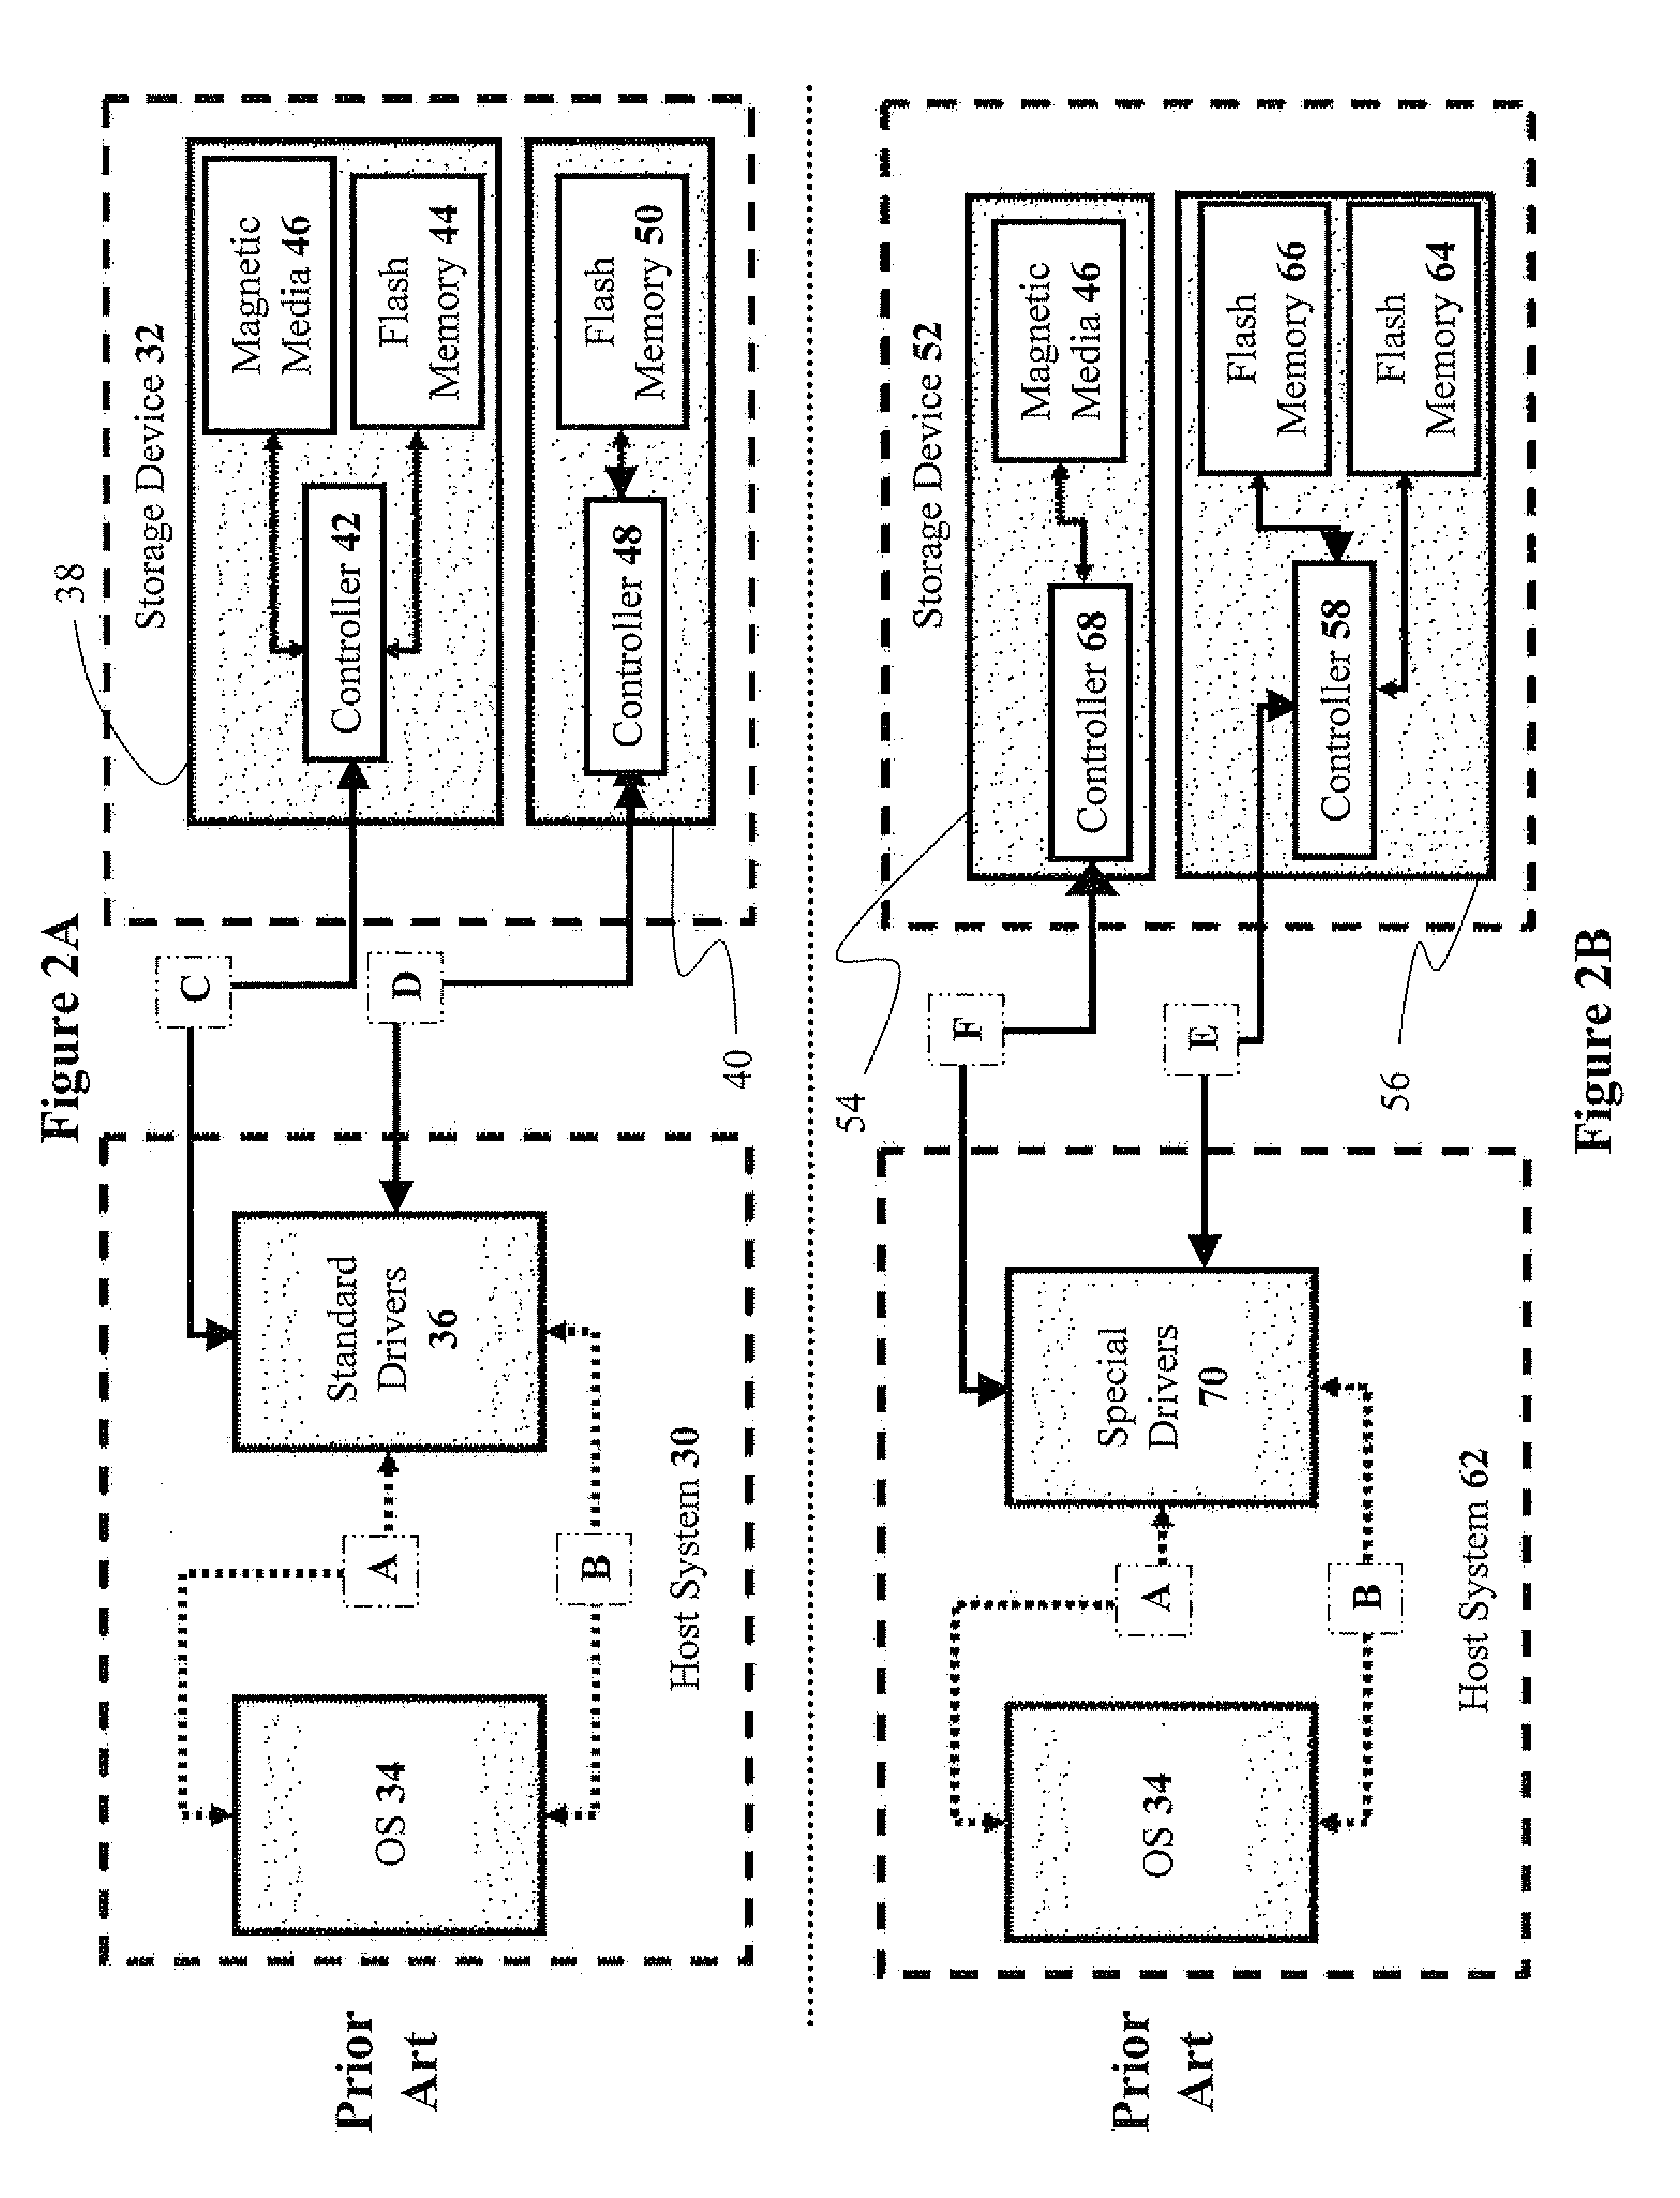 Systems For Supporting Readydrive And Readyboost Accelerators In A Single Flash-Memory Storage Device